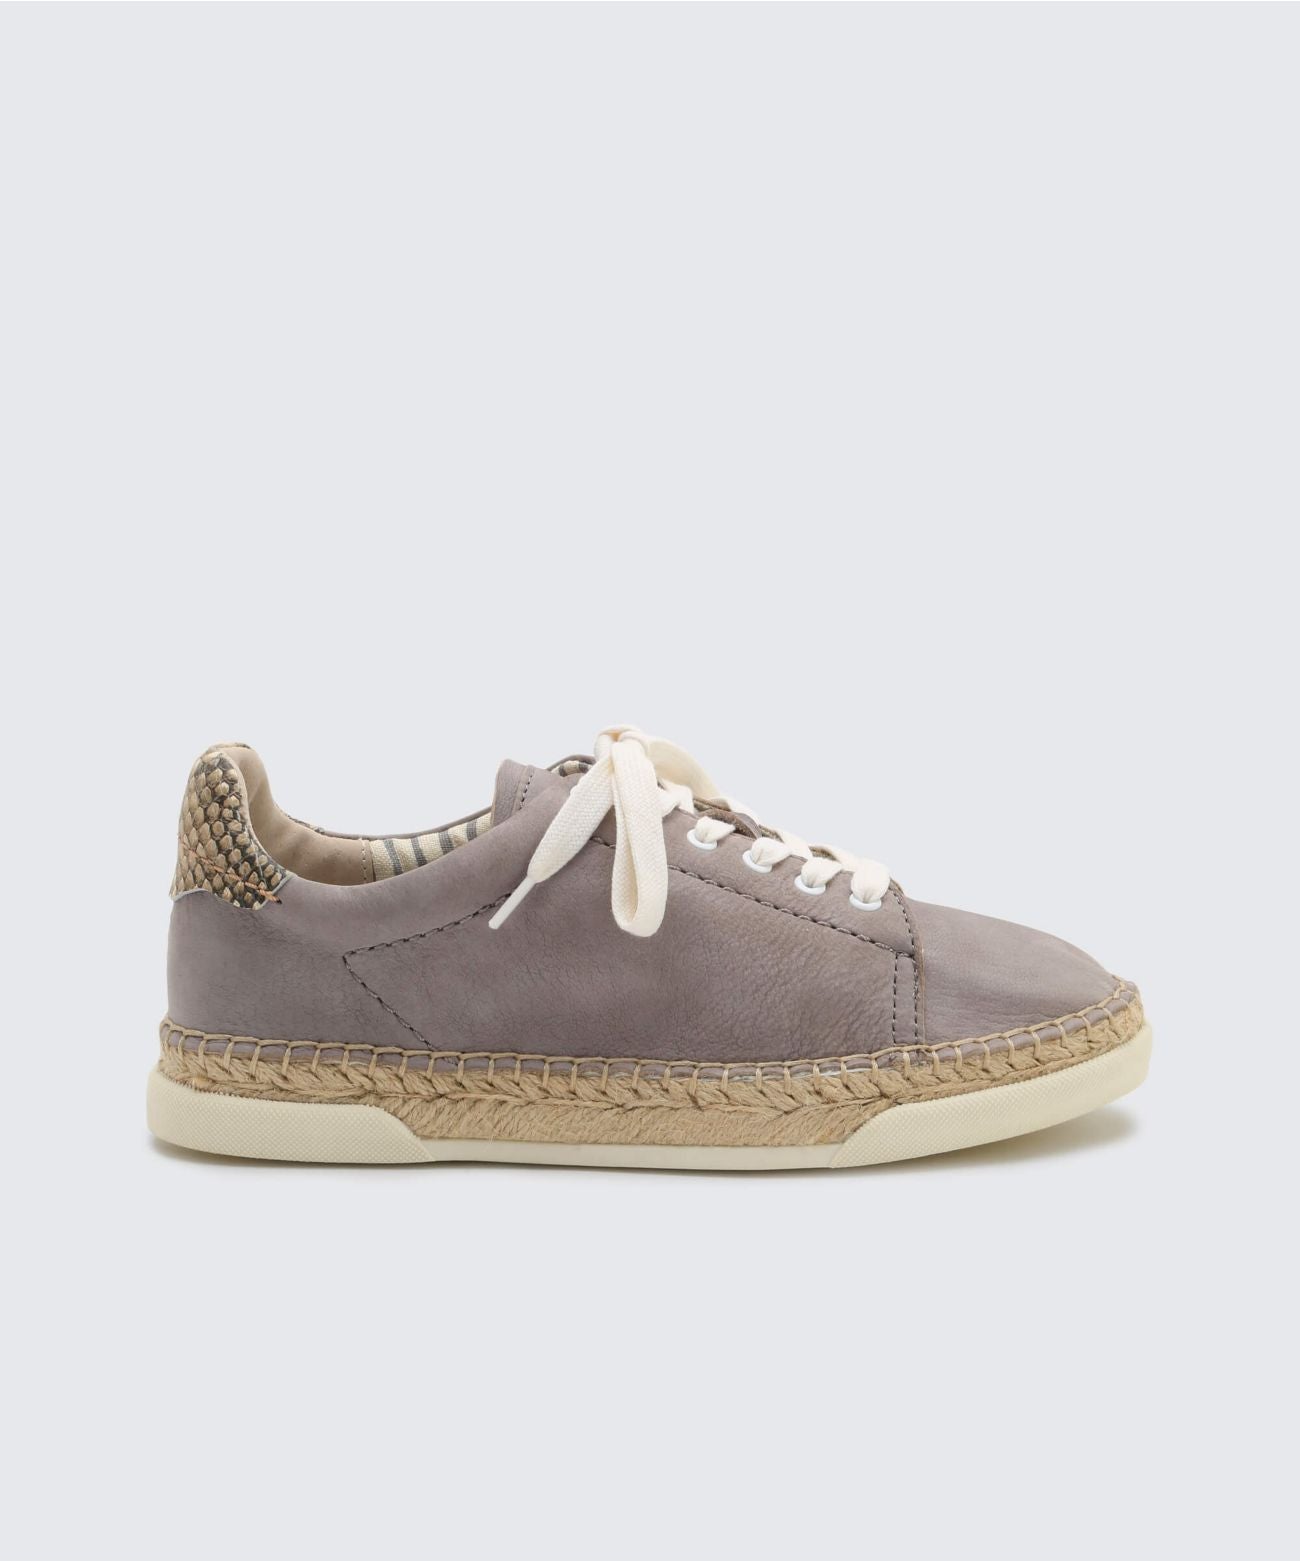 MADOX SNEAKERS IN GREY – Dolce Vita